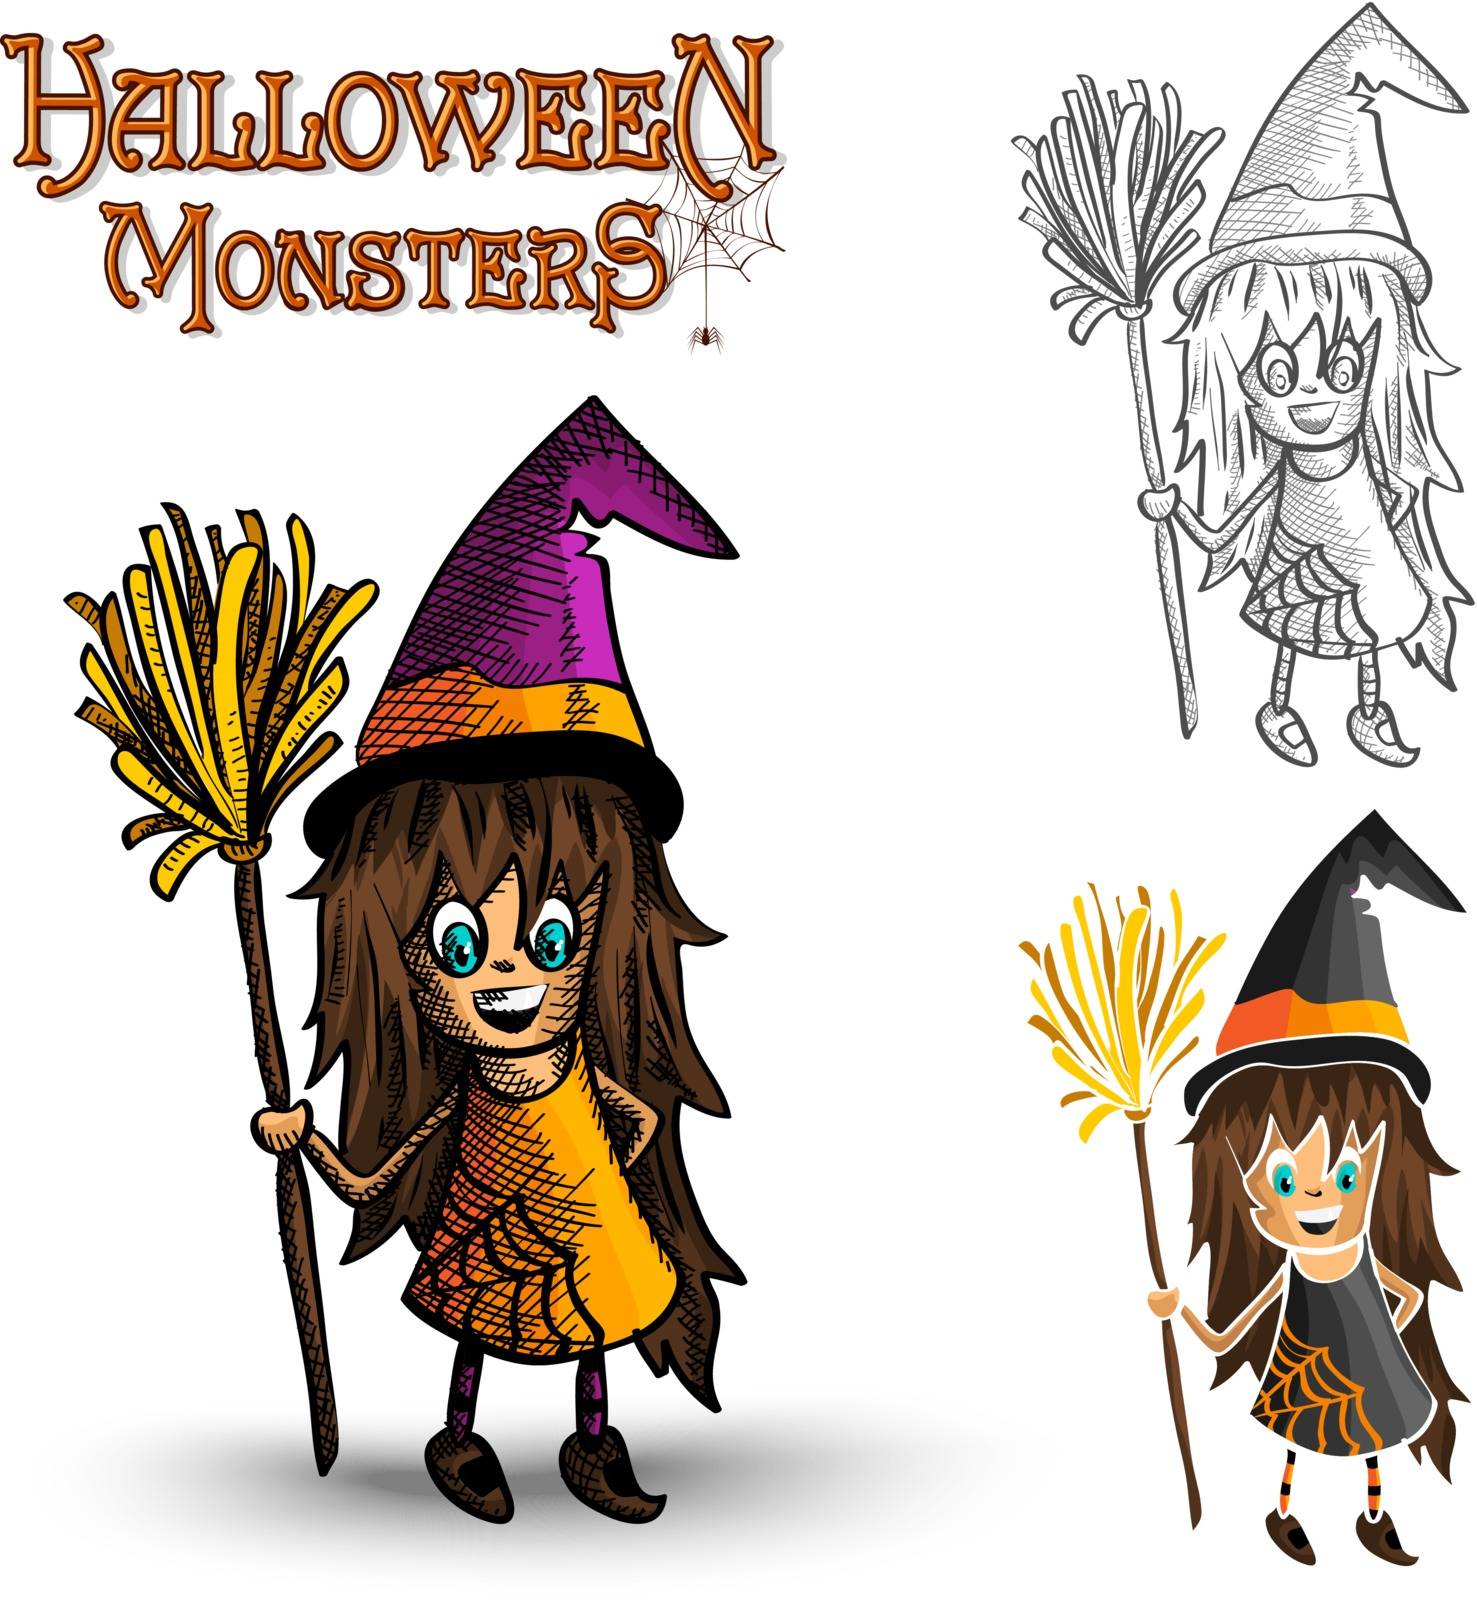 Halloween monsters spooky witch illustration EPS10 file by cienpies